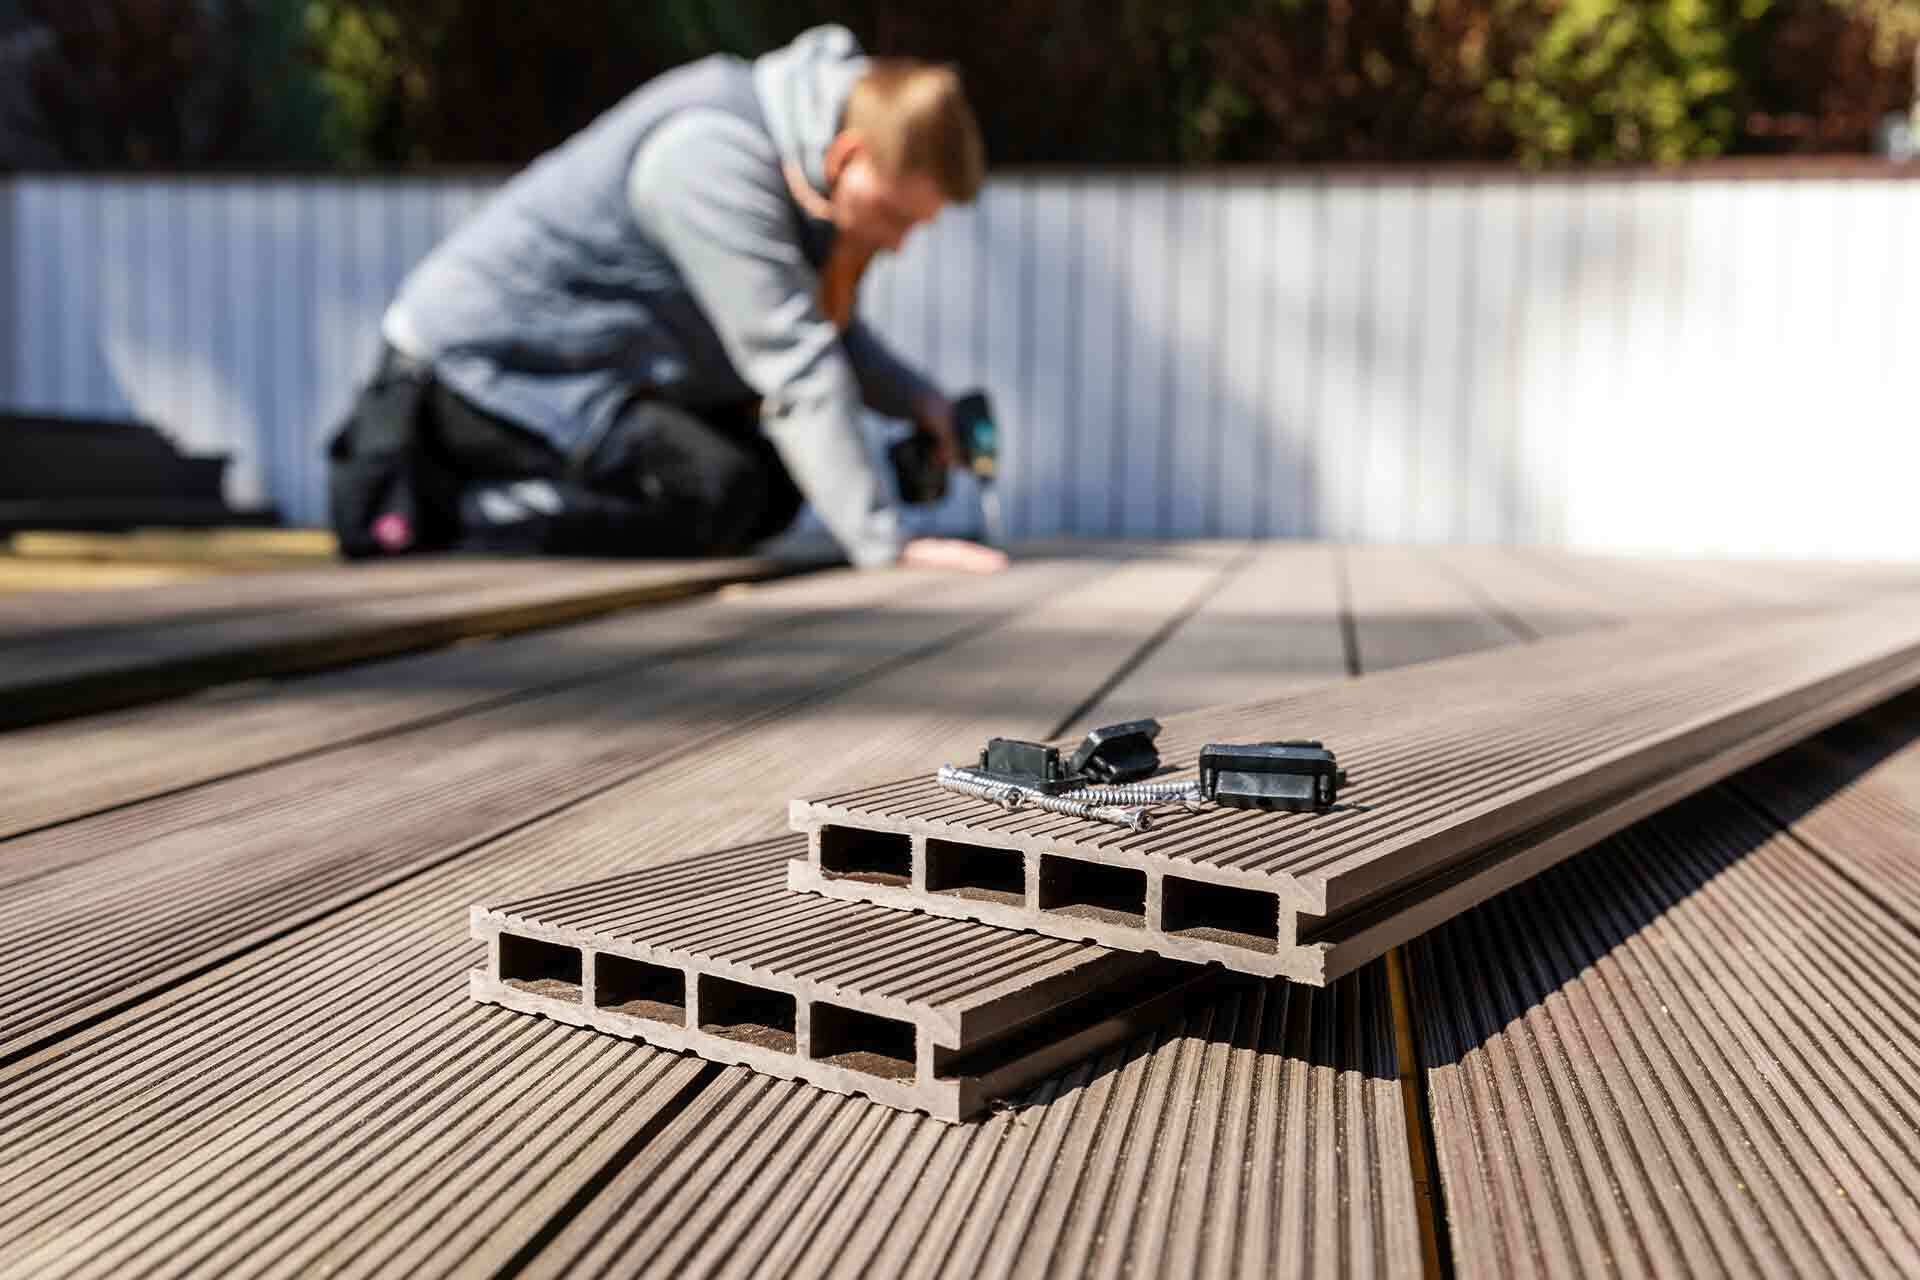 DIY Composite Deck: Step-by-Step Guide To Building A Stunning Outdoor Space